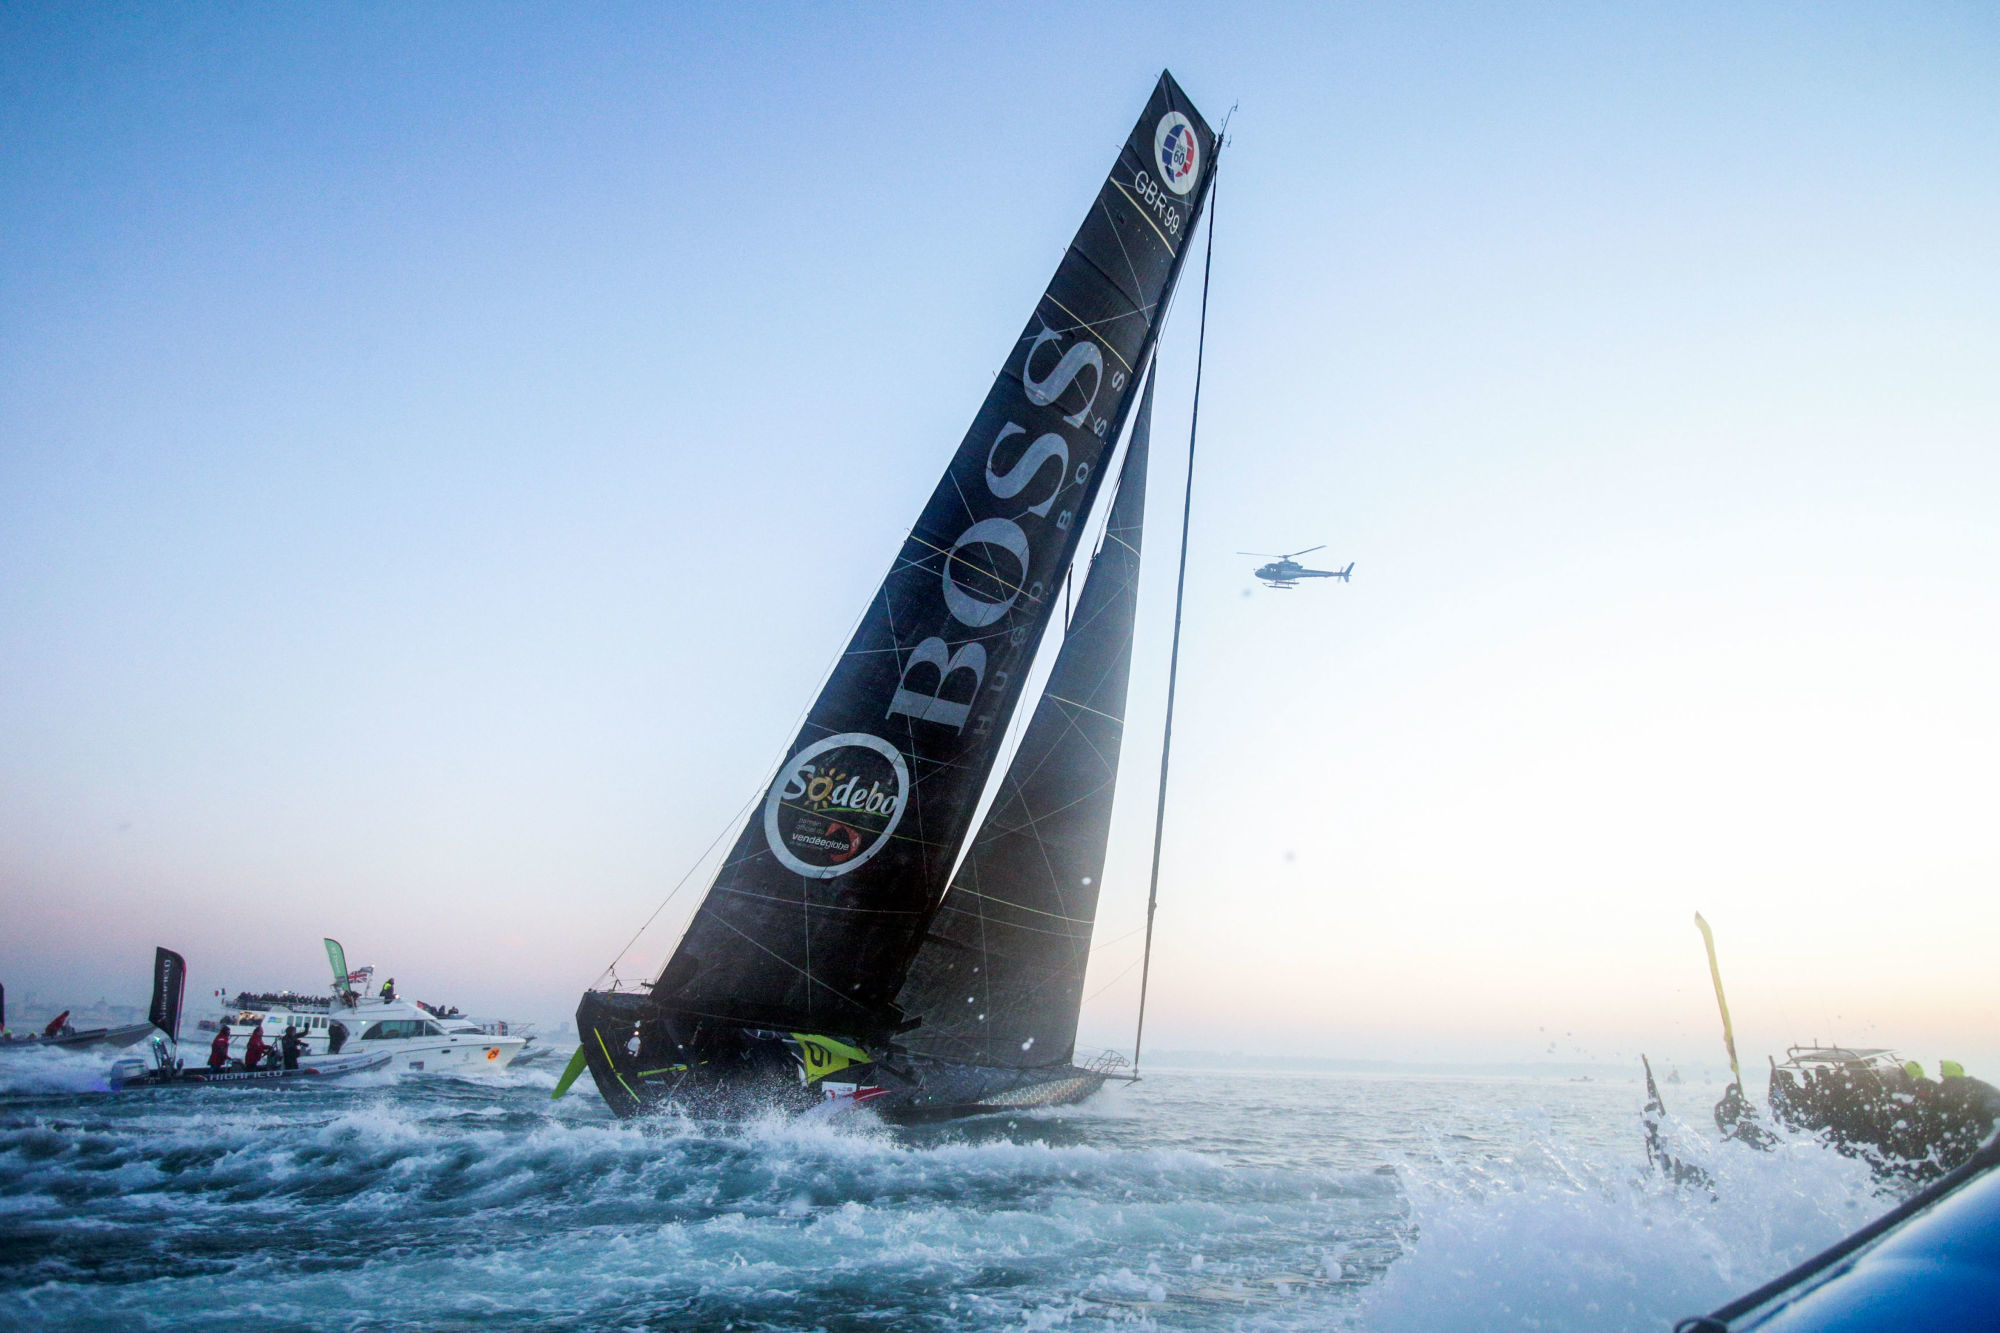 British sailor Alex Thomson as he comes in second in the Vendee Globe race at Les Sables d'Olonne, western France. On January 19, 2017.